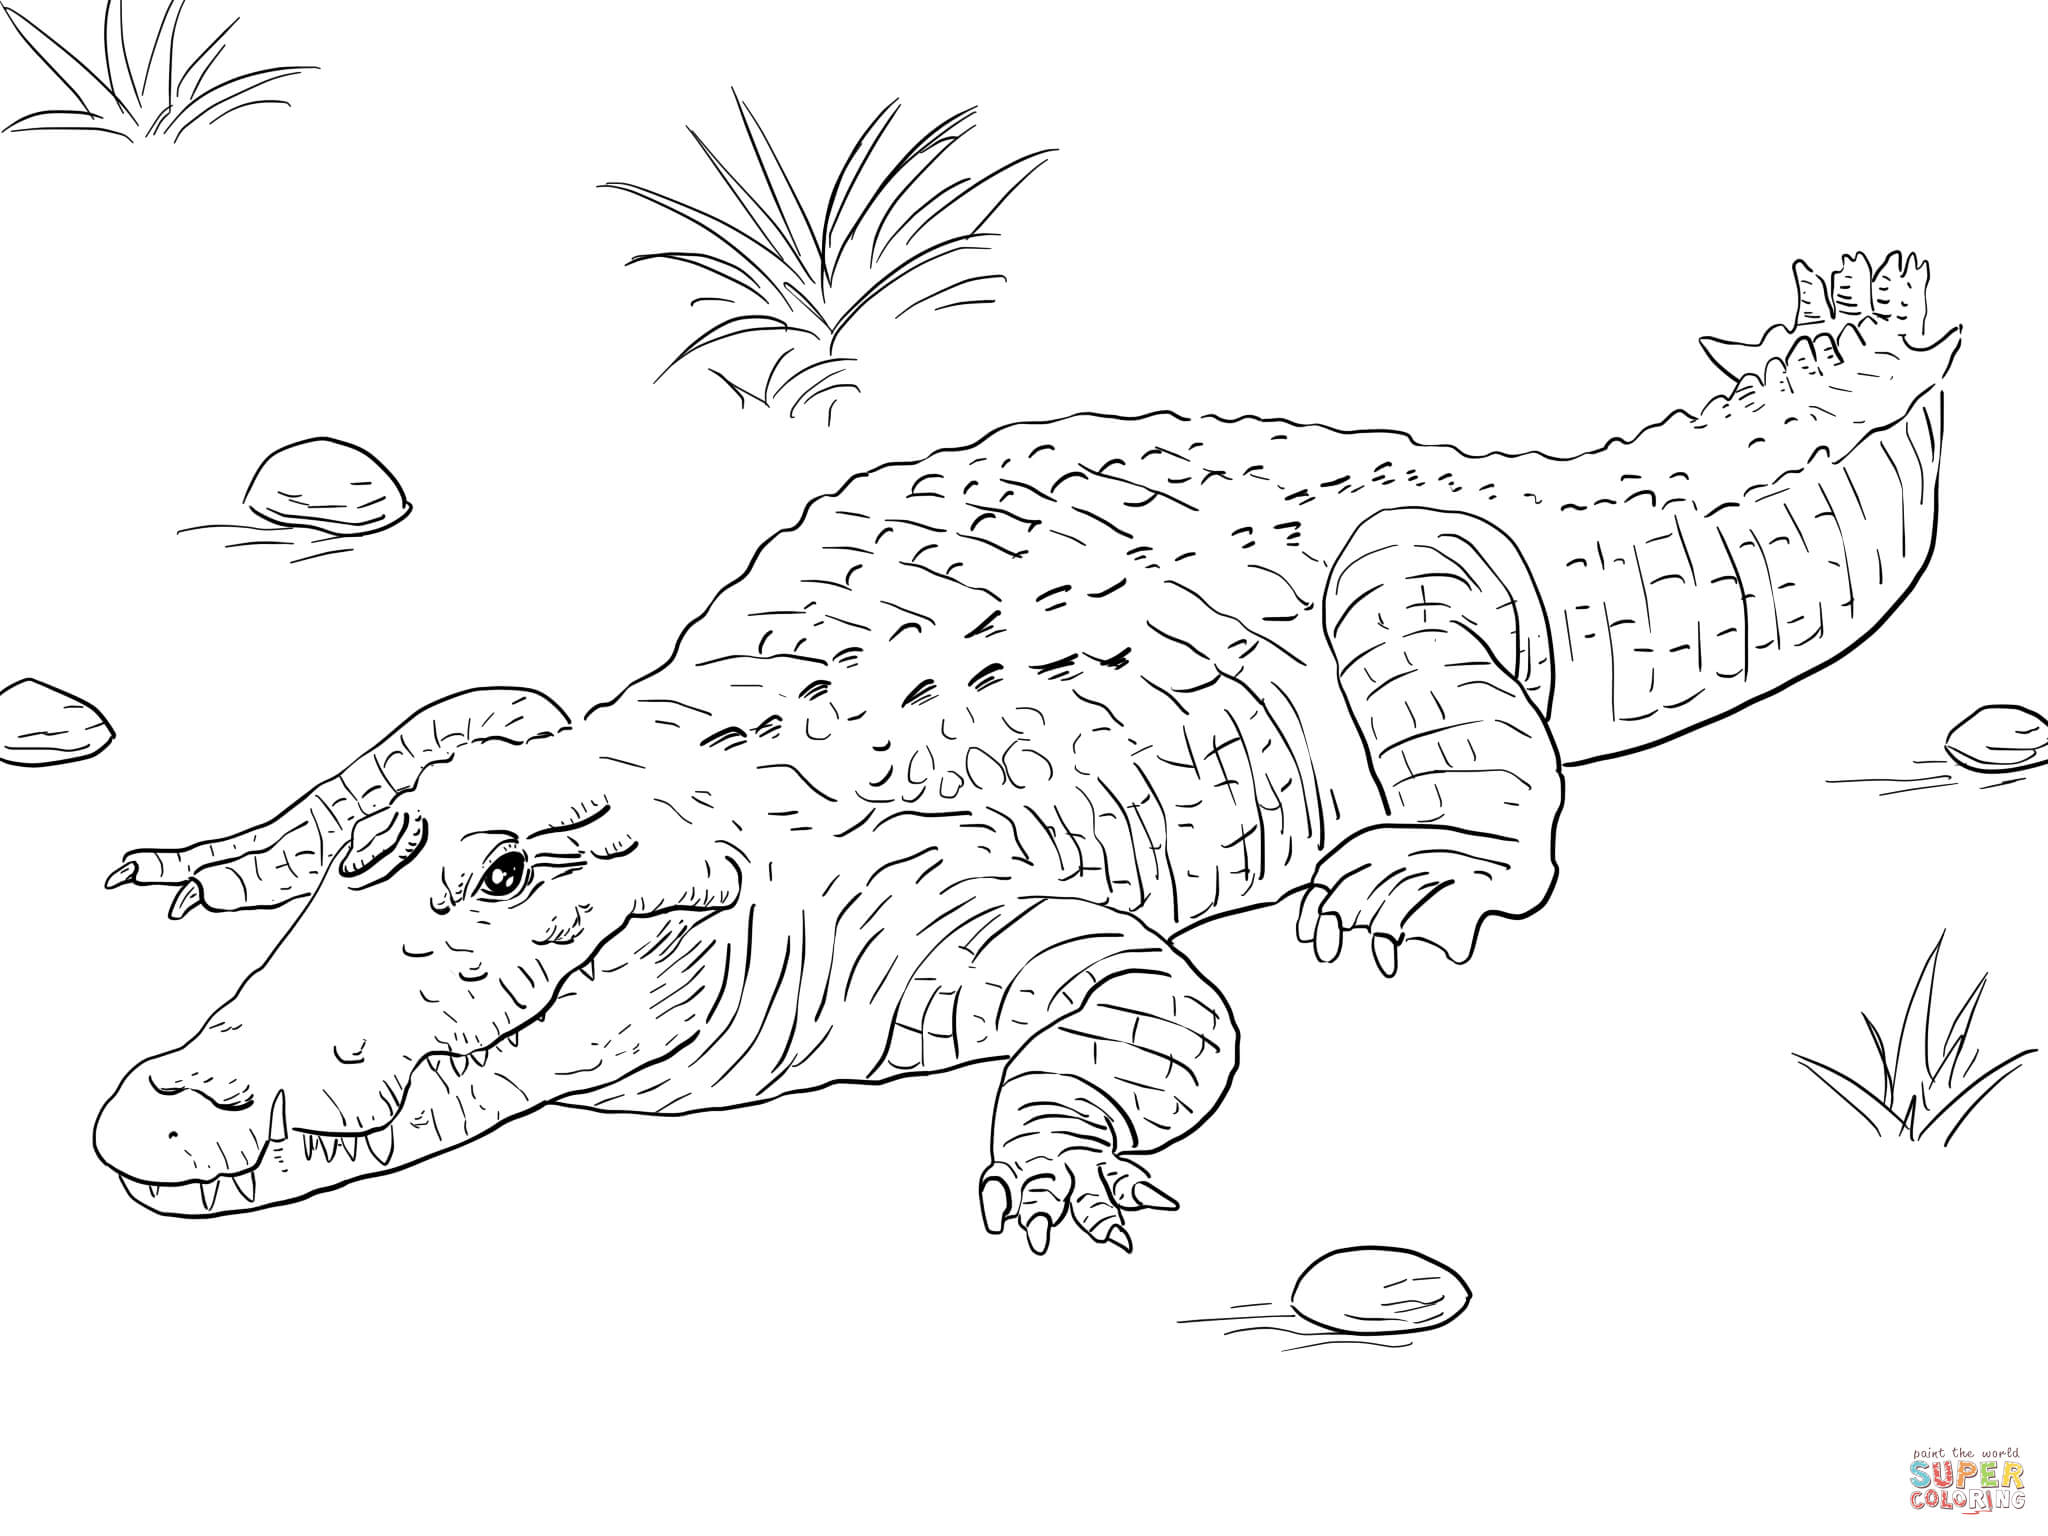 Crocodile coloring pages | Free Coloring Pages